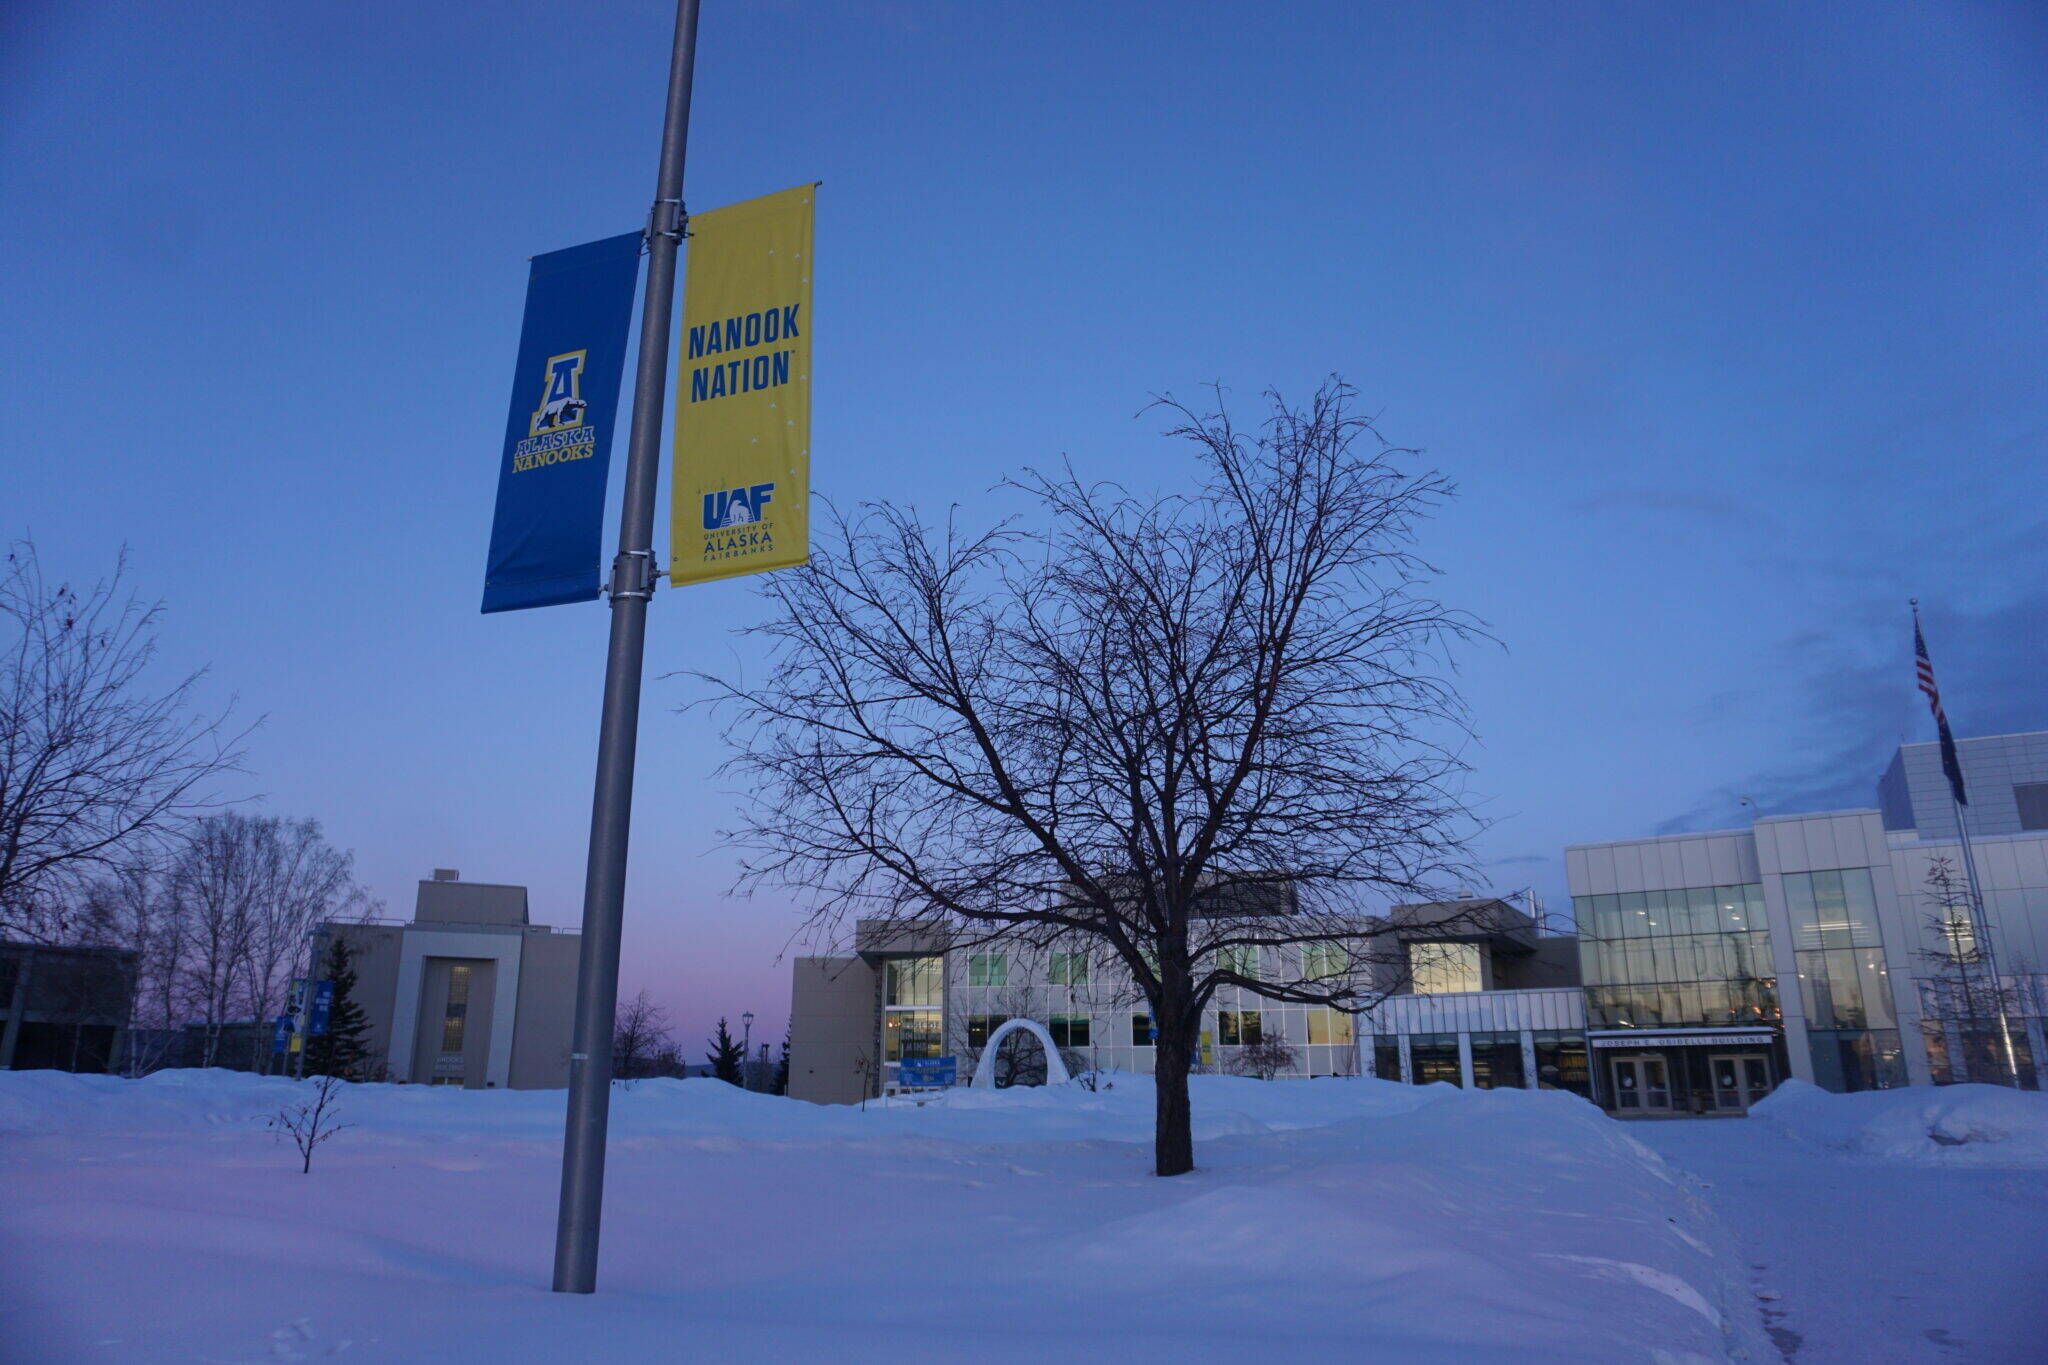 Sunset hues color the sky and the snow at the University of Alaska Fairbanks campus on Feb. 26. Enrollment in the University of Alaska system is growing, as are research programs, notably the Arctic-focused programs for which UAF is famous, said University of Alaska President Pat Pitney. (Yereth Rosen/Alaska Beacon)